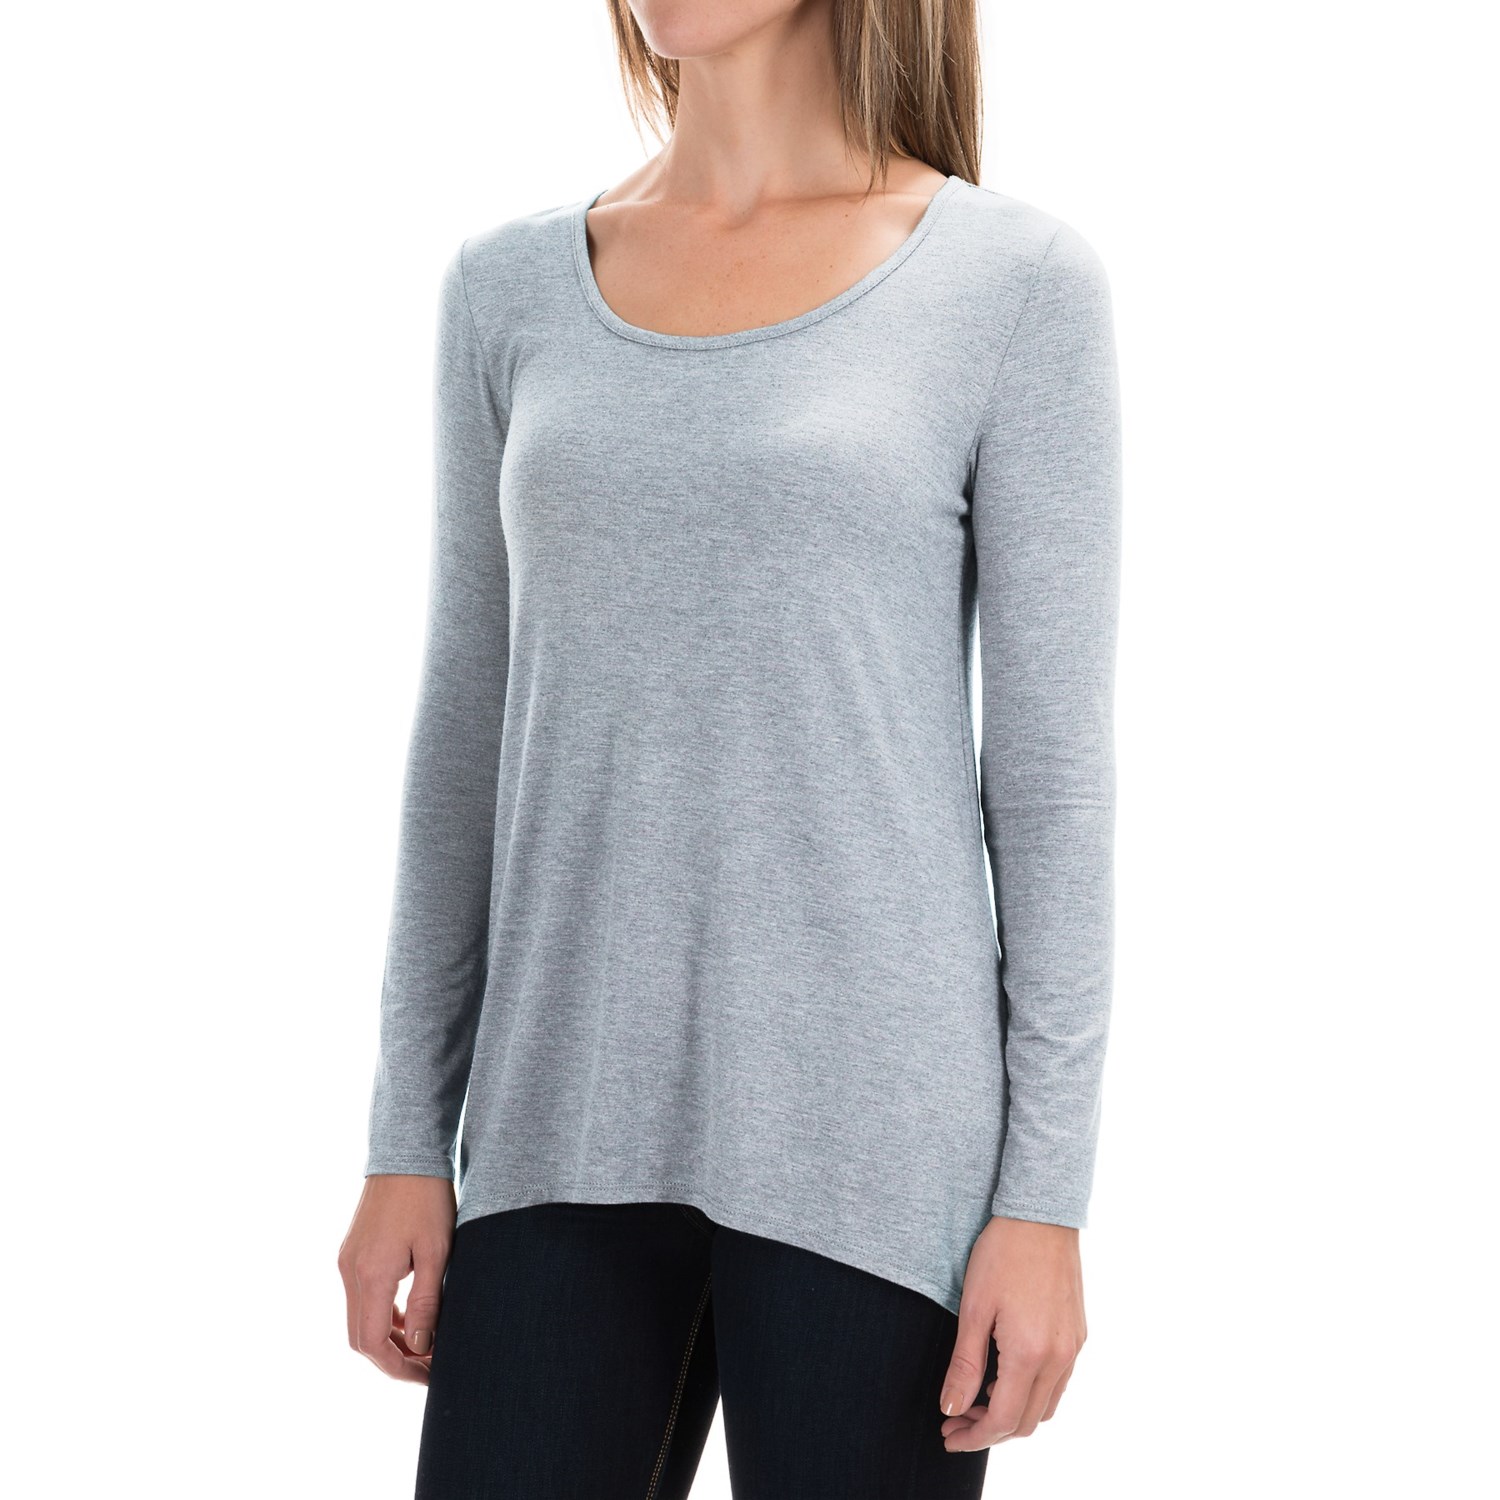 Willi Smith Scoop Shirt (For Women) - Save 55%